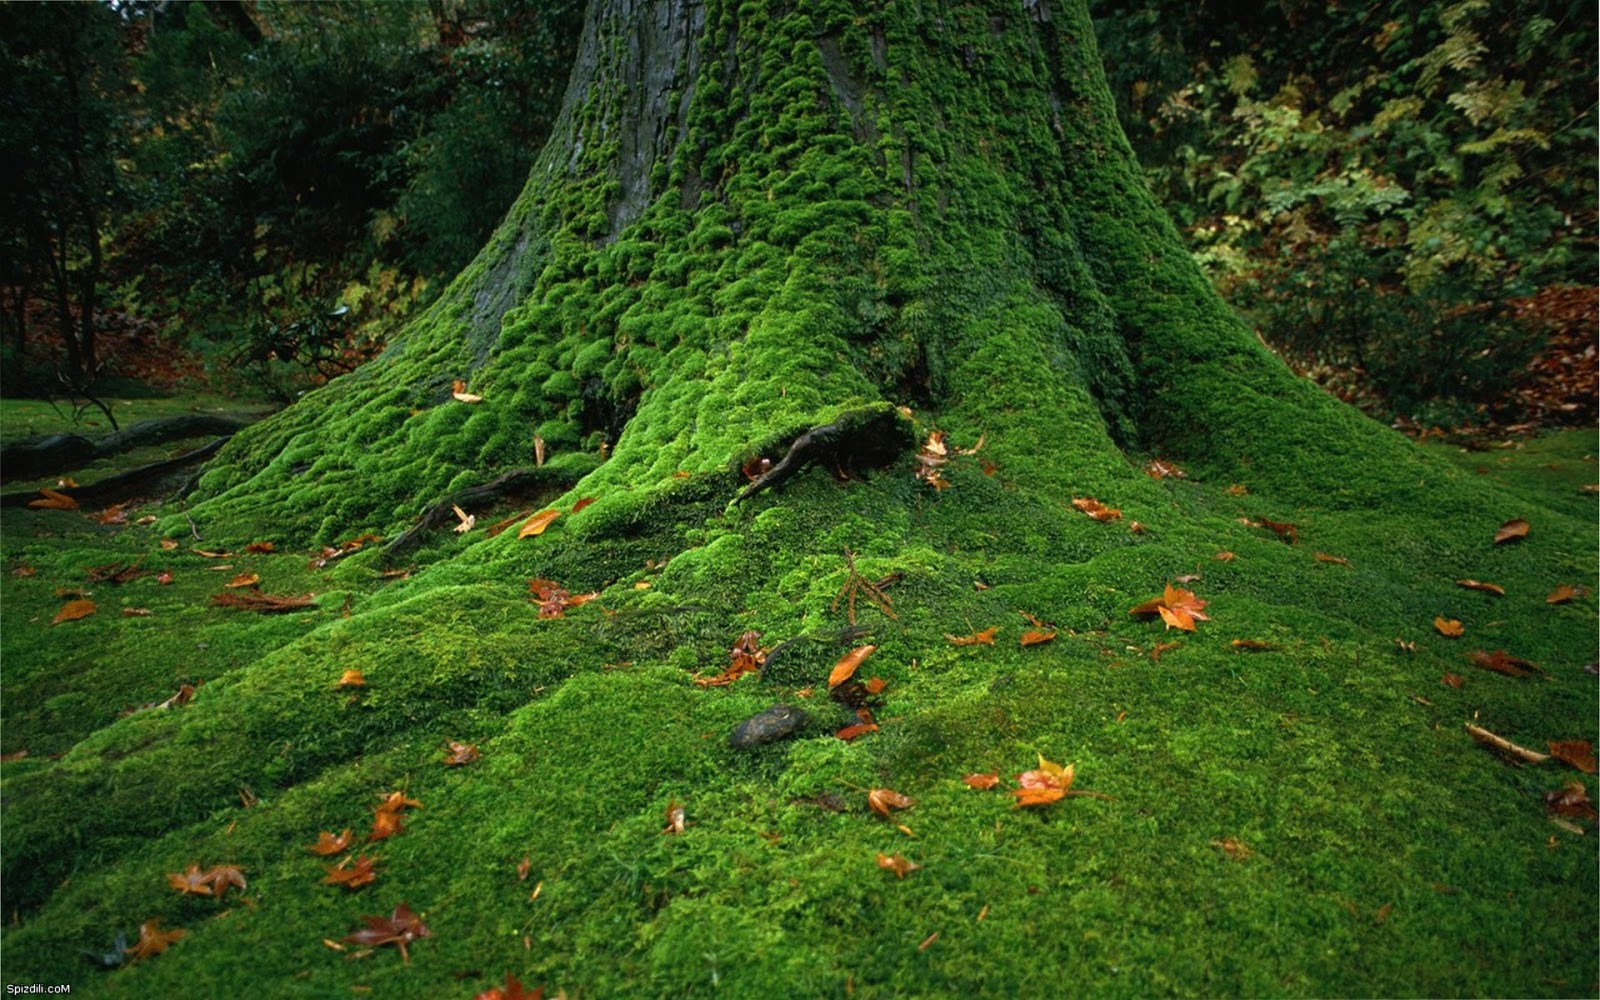 moss wallpaper,tree,natural landscape,nature,old growth forest,natural environment